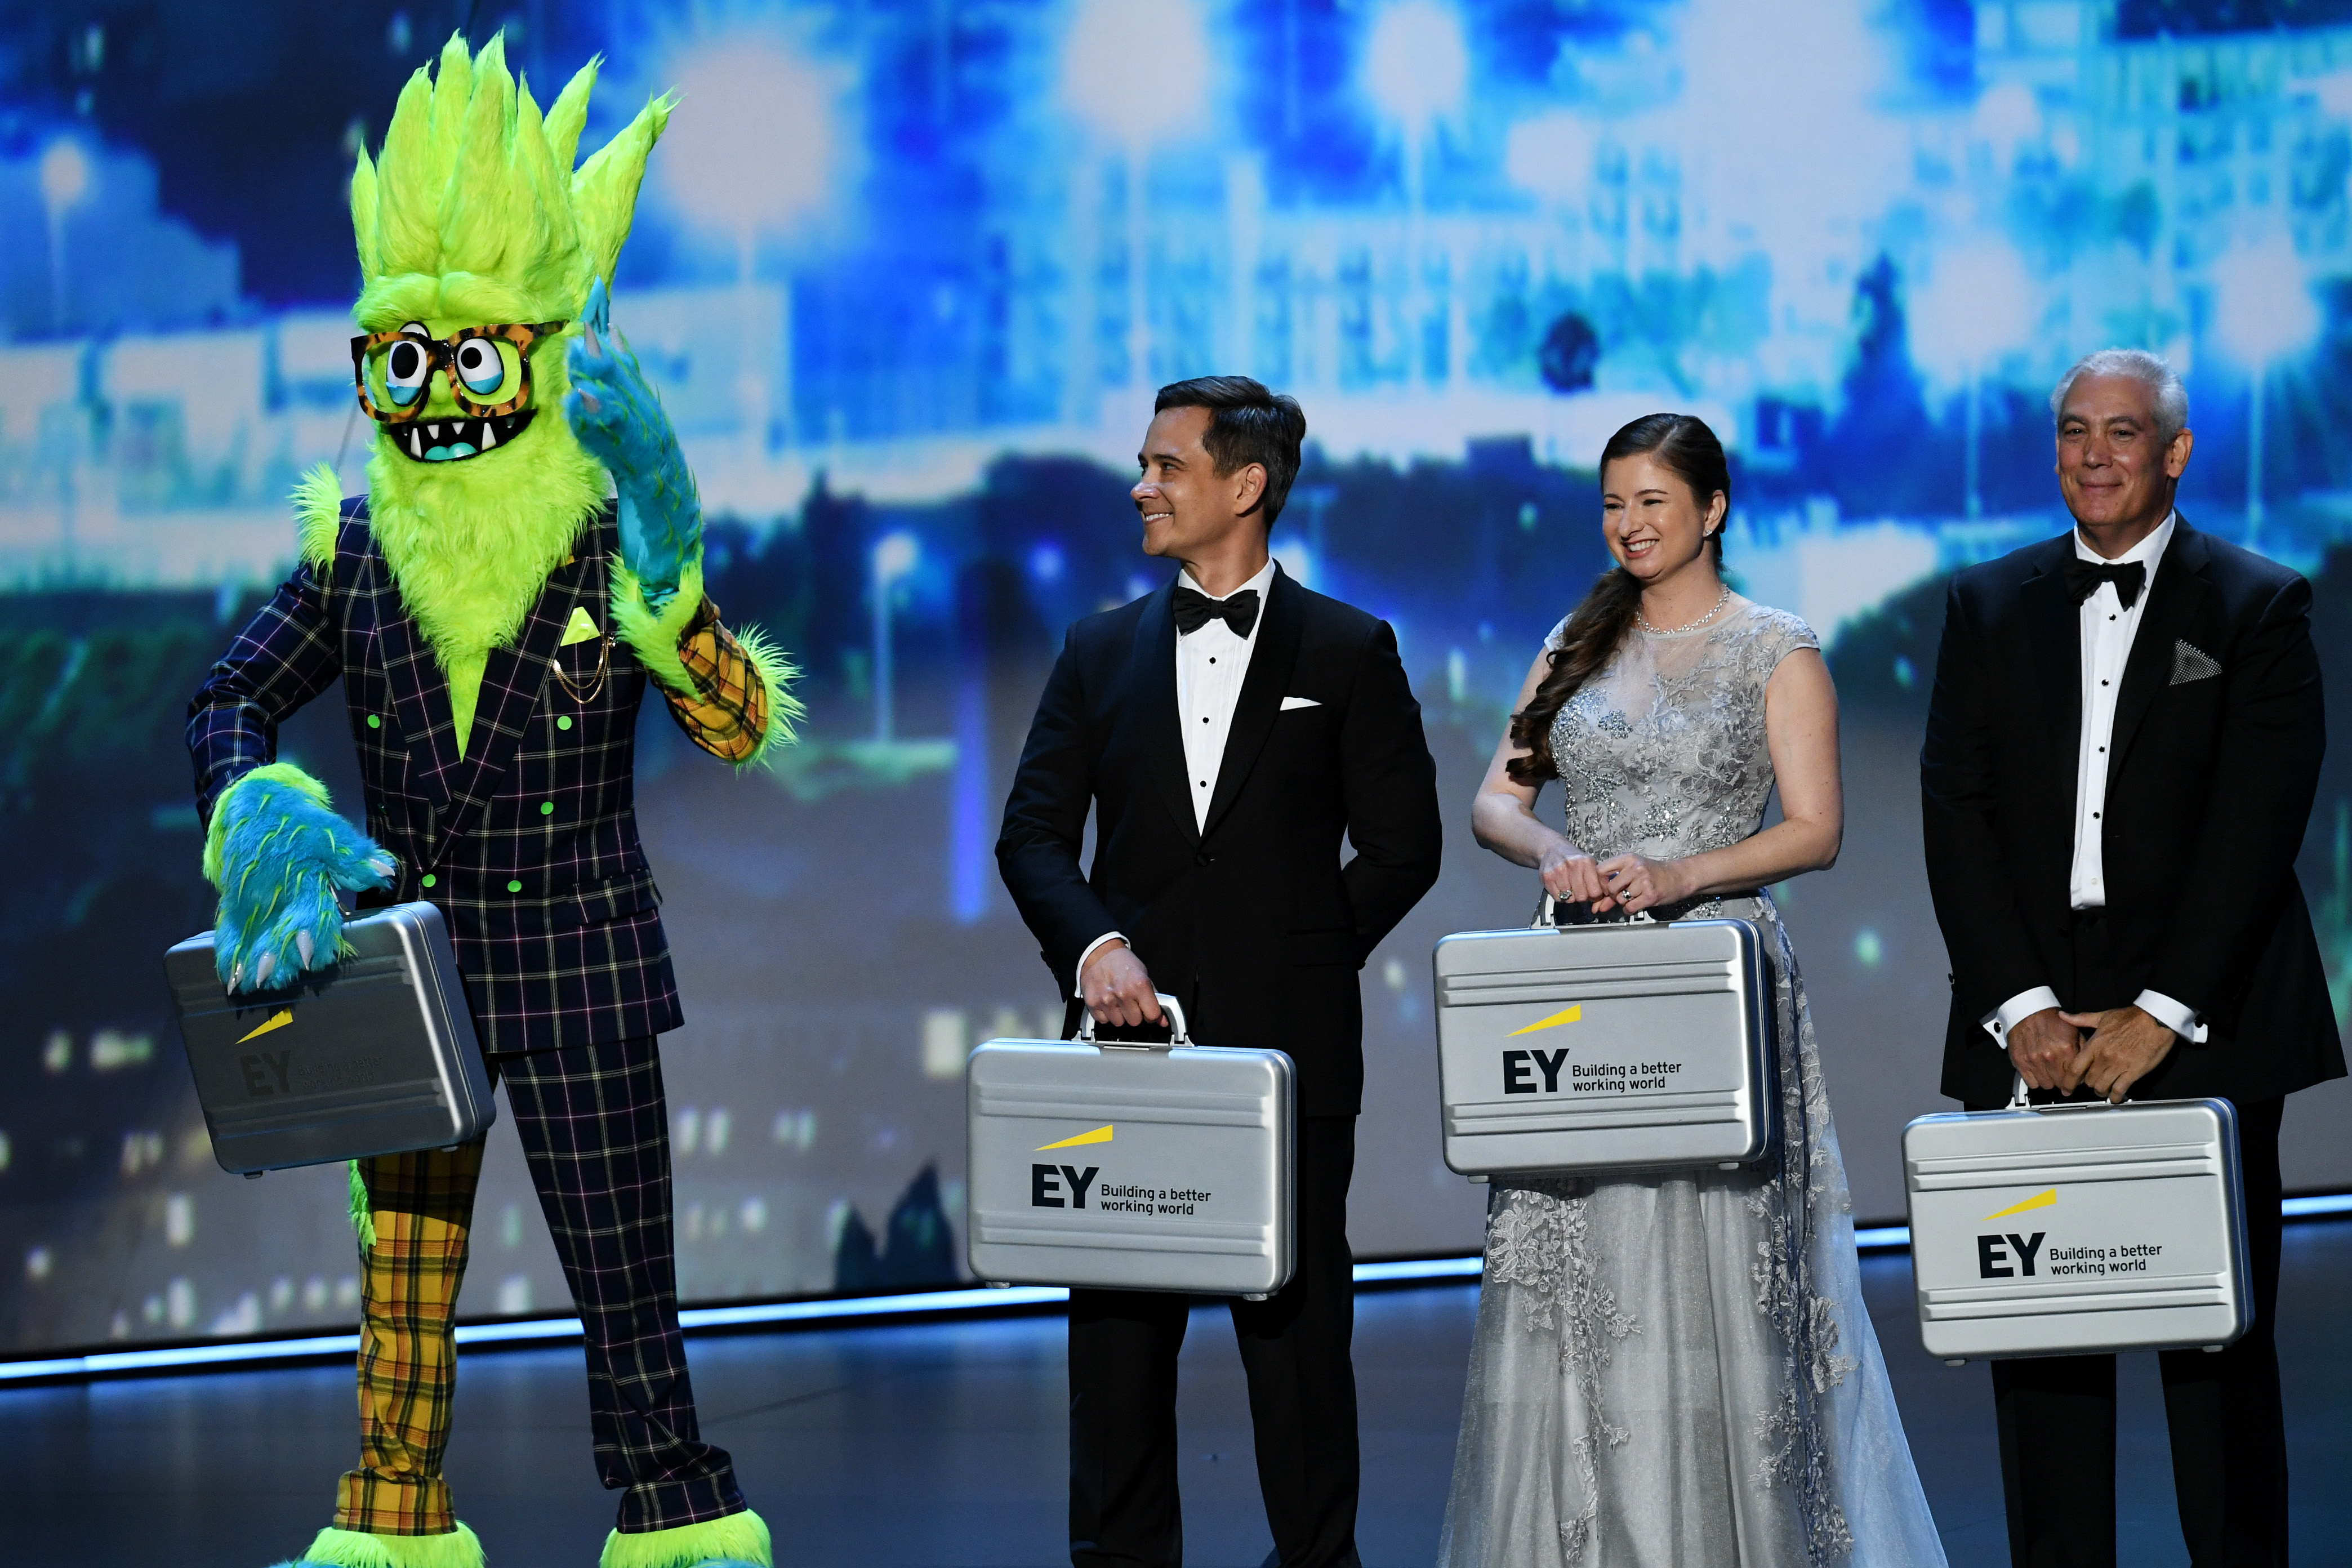 A character from 'The Masked Singer' and Ernst &amp; Young representatives appear onstage during the 71st Emmy Awards. (Kevin Winter—Getty Images)